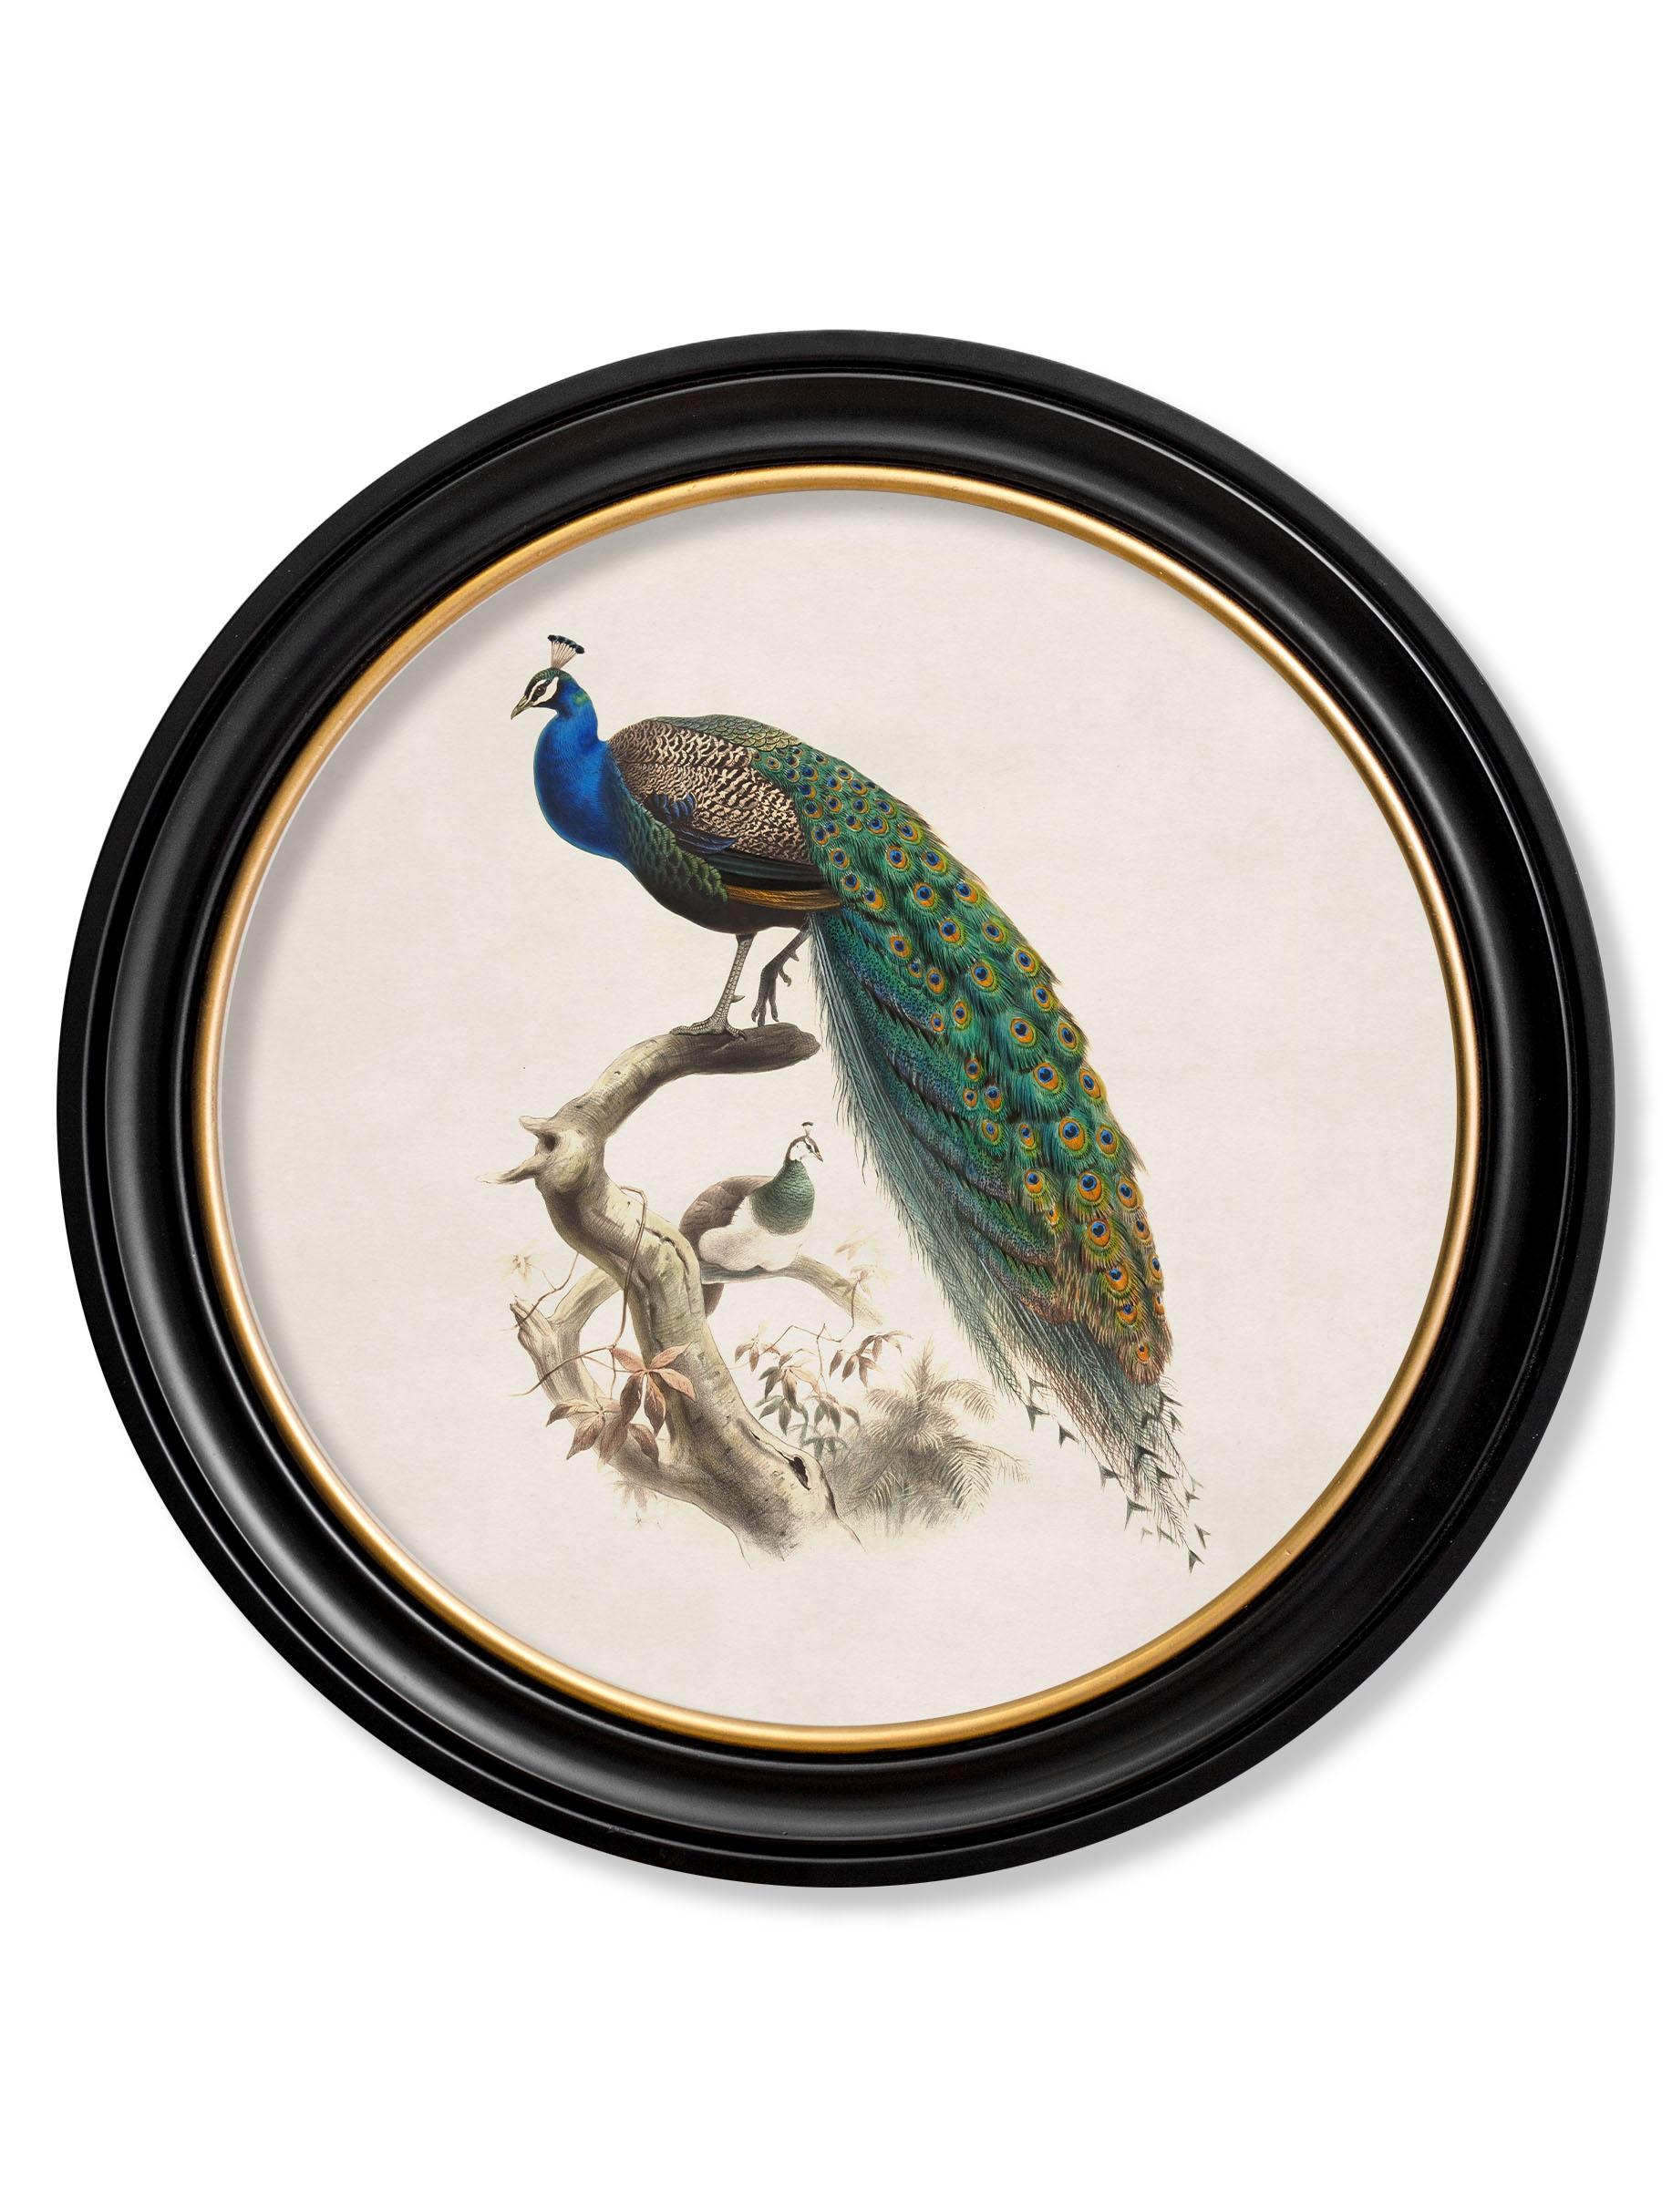 history of peacock